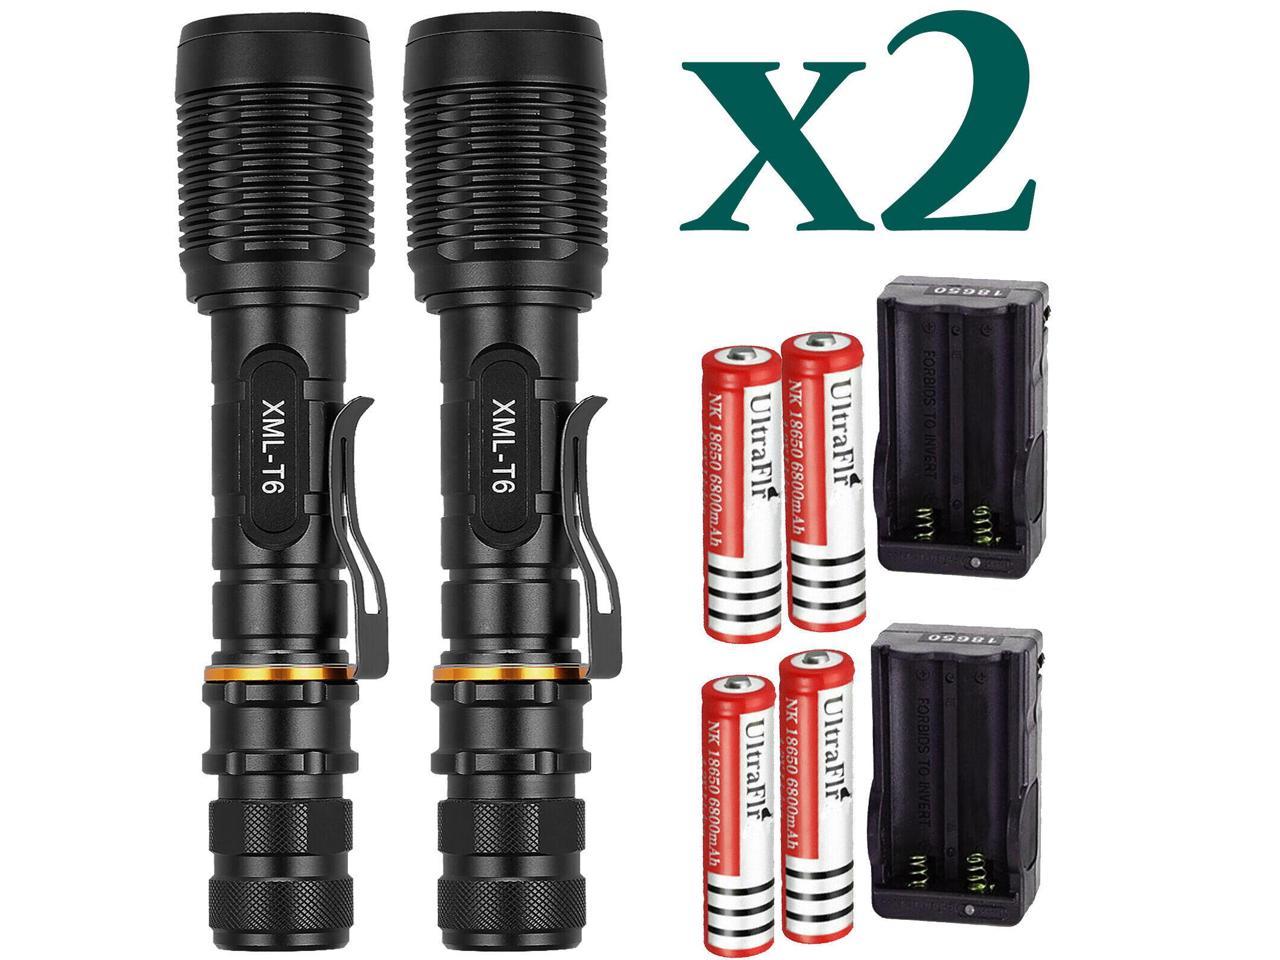 2x90000Lumen Tactical T6 LED Flashlight Torch Rechargeable 18650 Battery&Charger 